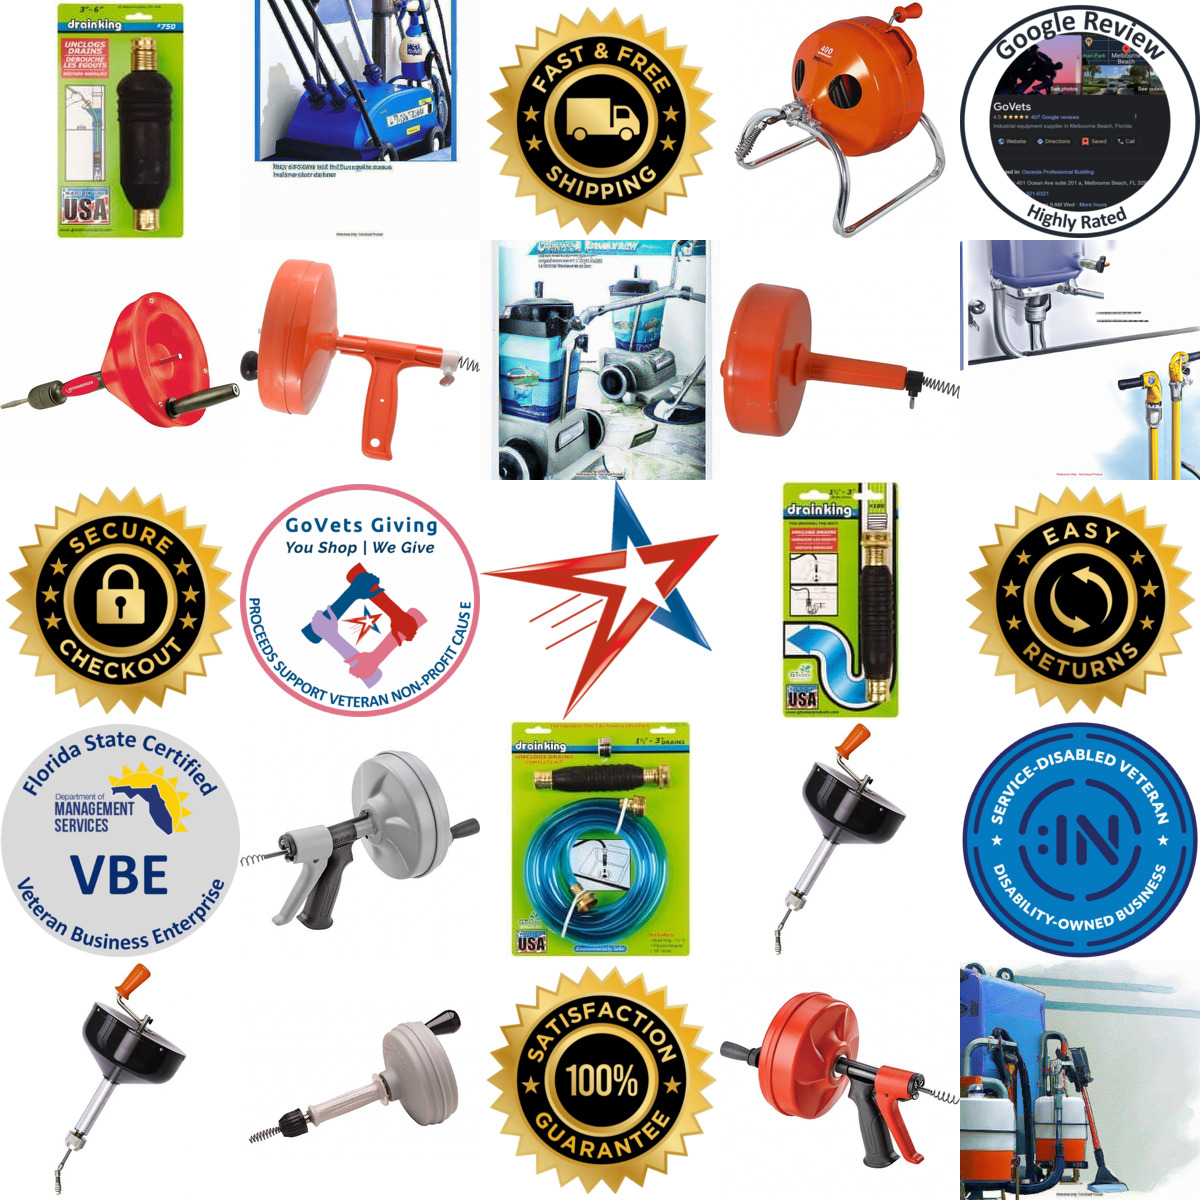 A selection of Manual and Hand Drain Cleaners products on GoVets